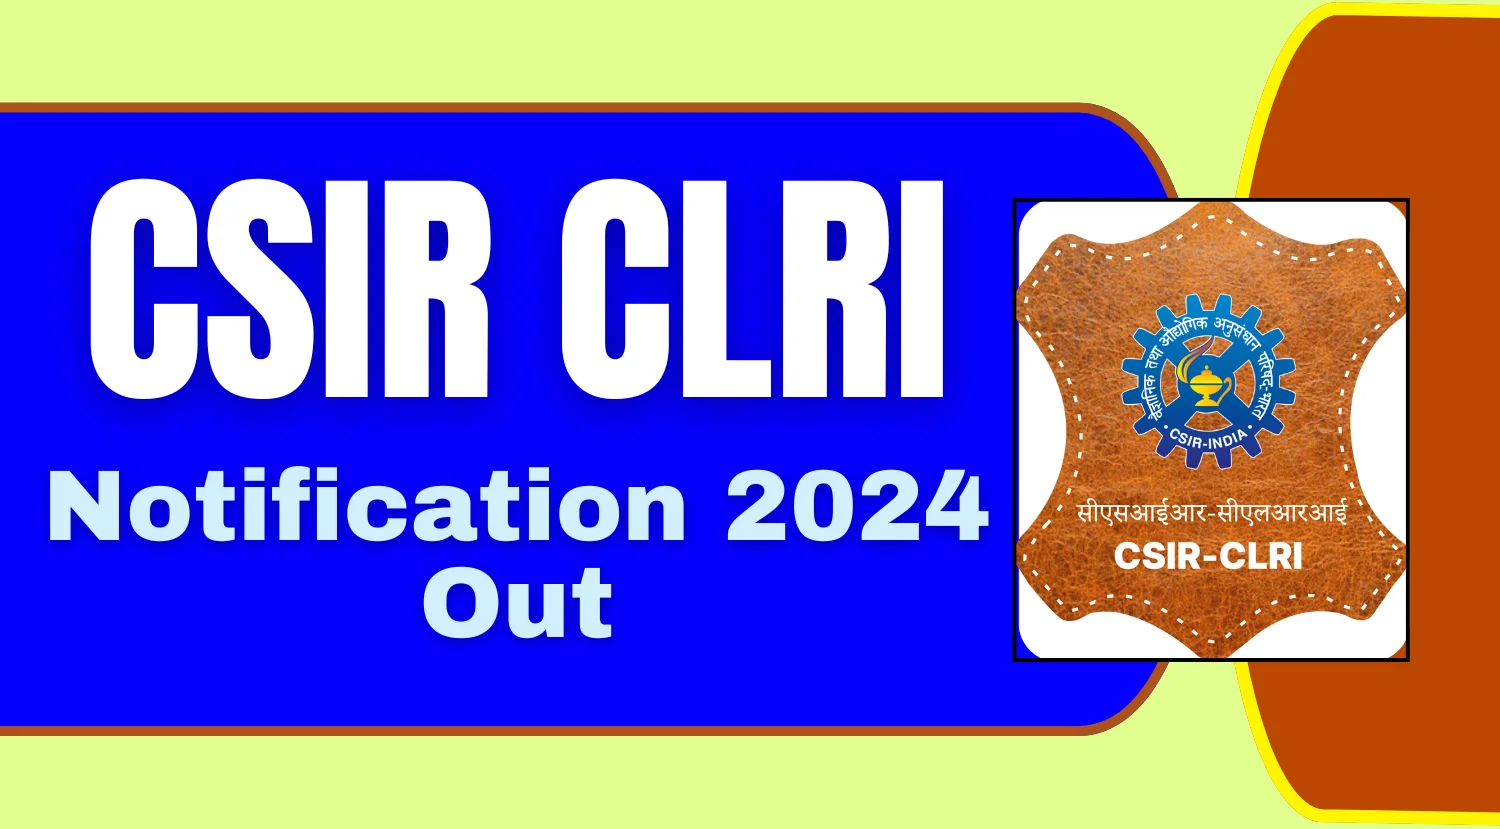 CSIR CLRI Recruitment 2024 Notification Out for Assistant, Associate and Other Posts